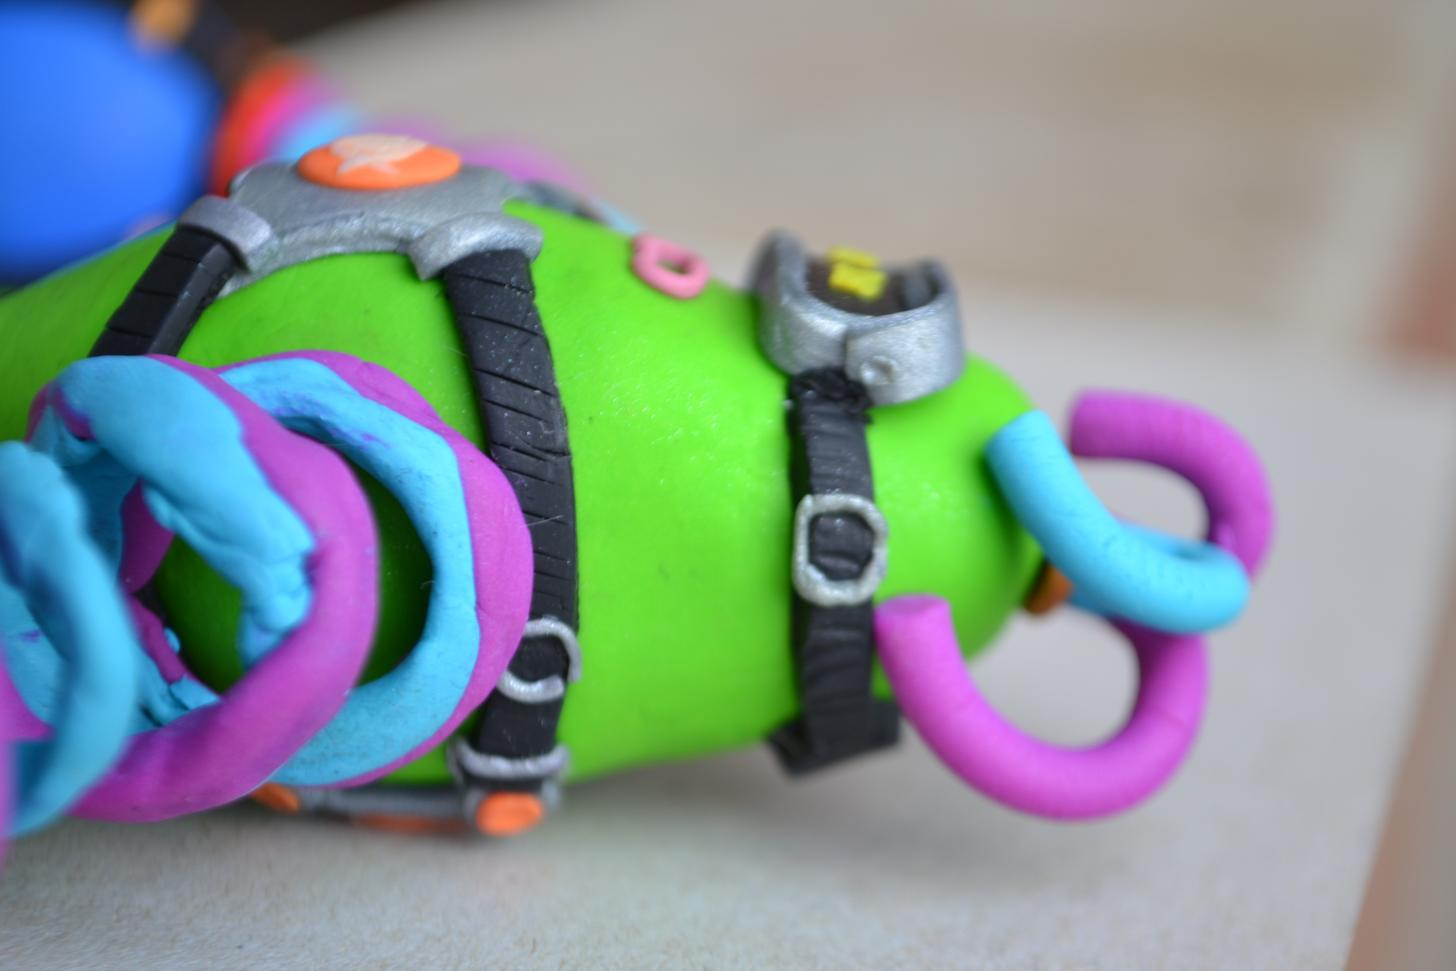 Arms’ Helix Is Even More Unnerving In Clay Form